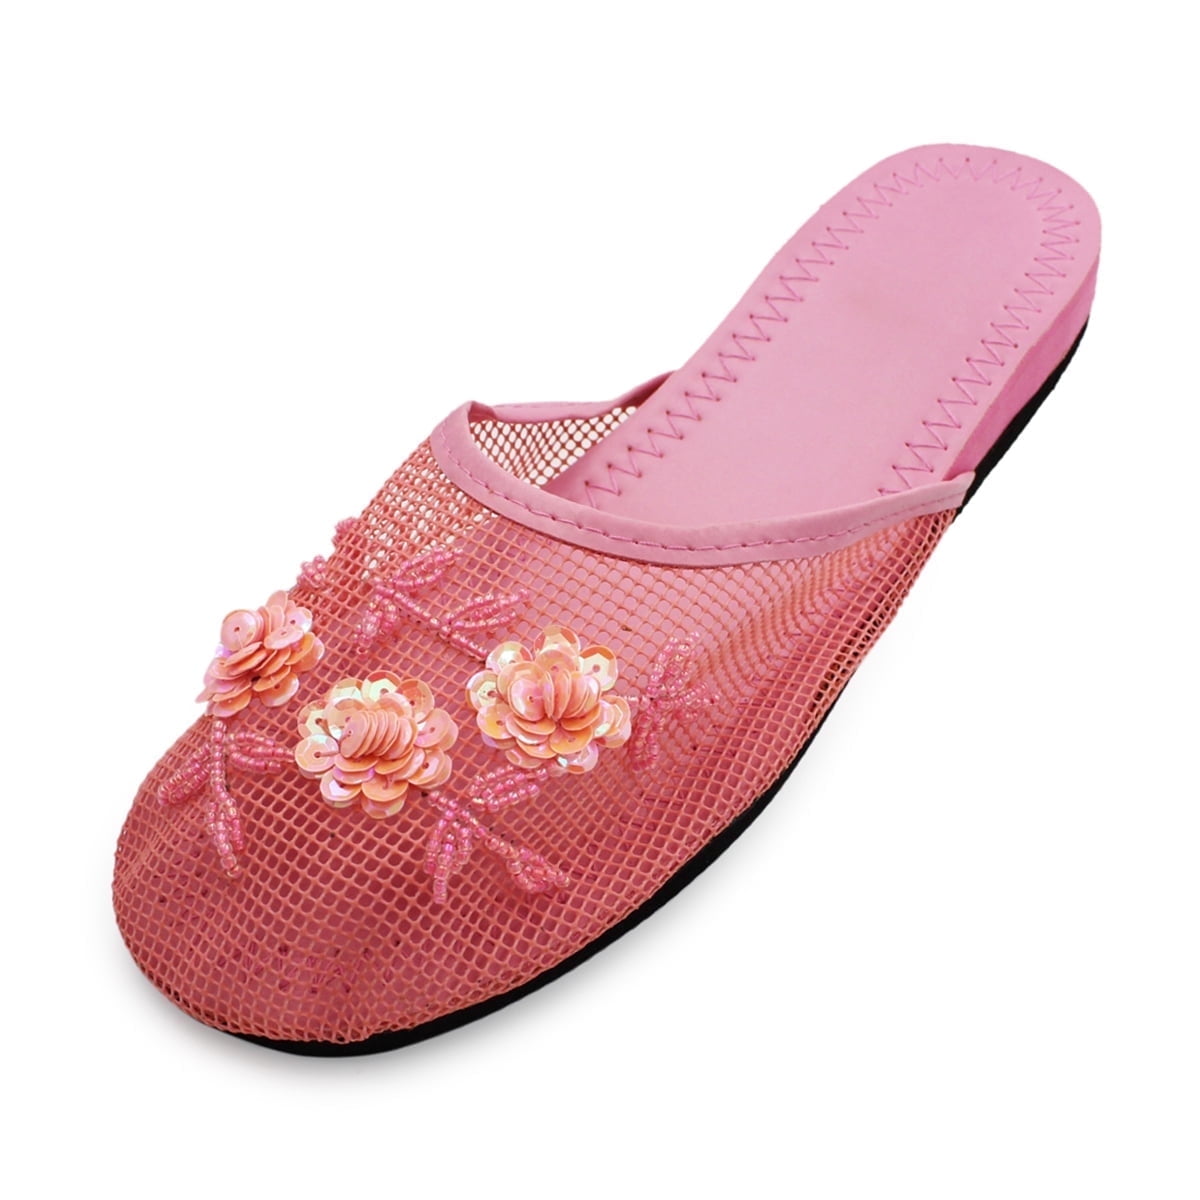 LAVRA Women's Mesh Sequin Slide Beaded Chinese Slippers Floral ...